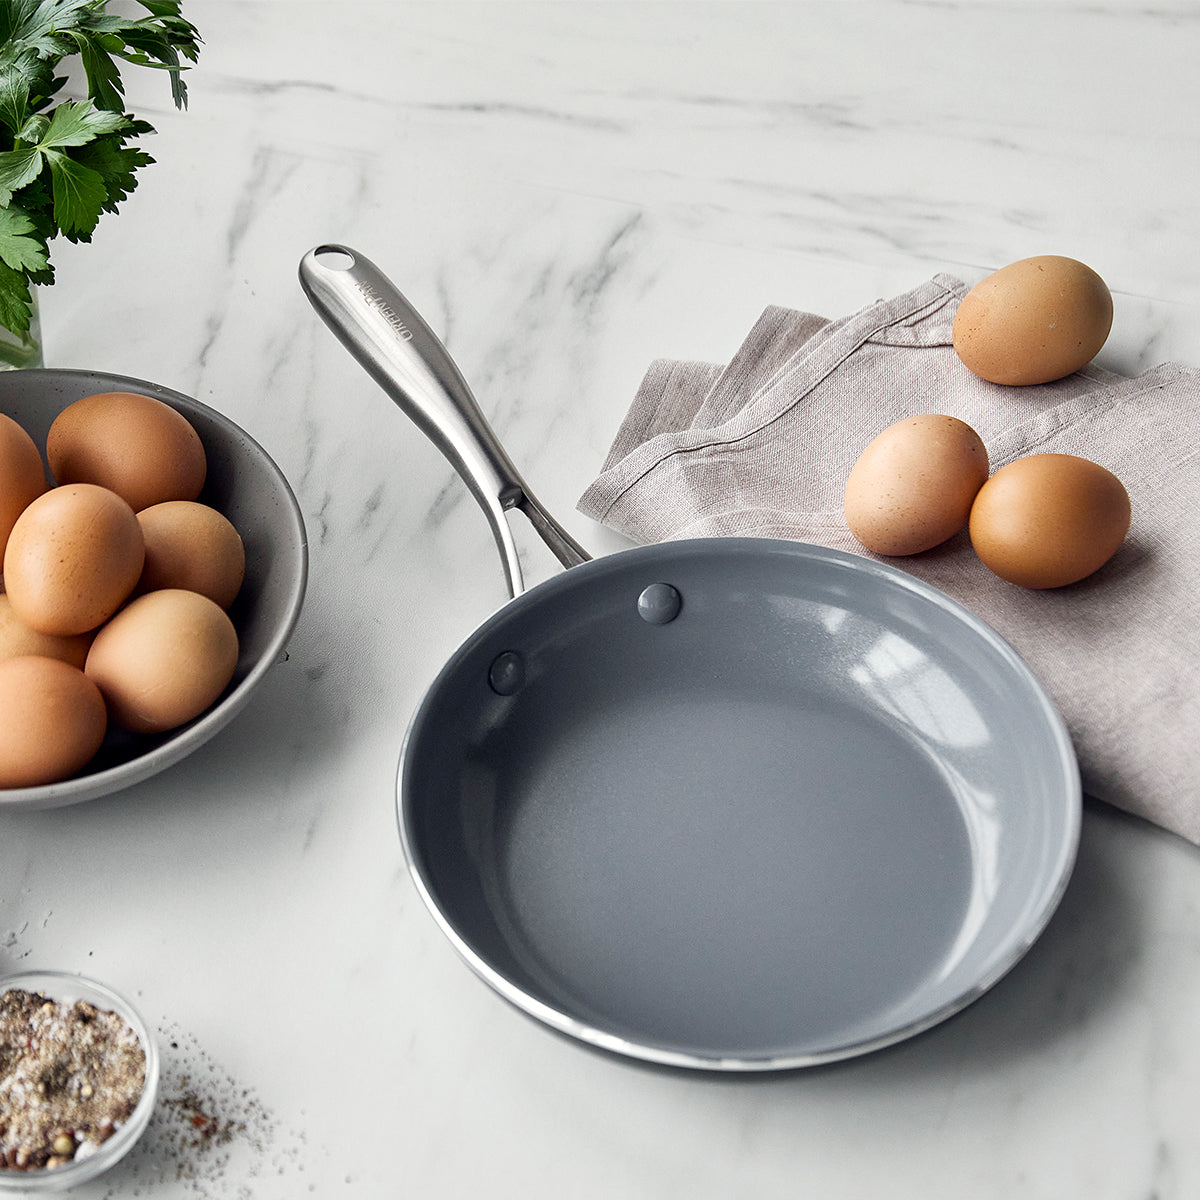 Online-Shop - Buy Zwilling Pro non-stick frying pan